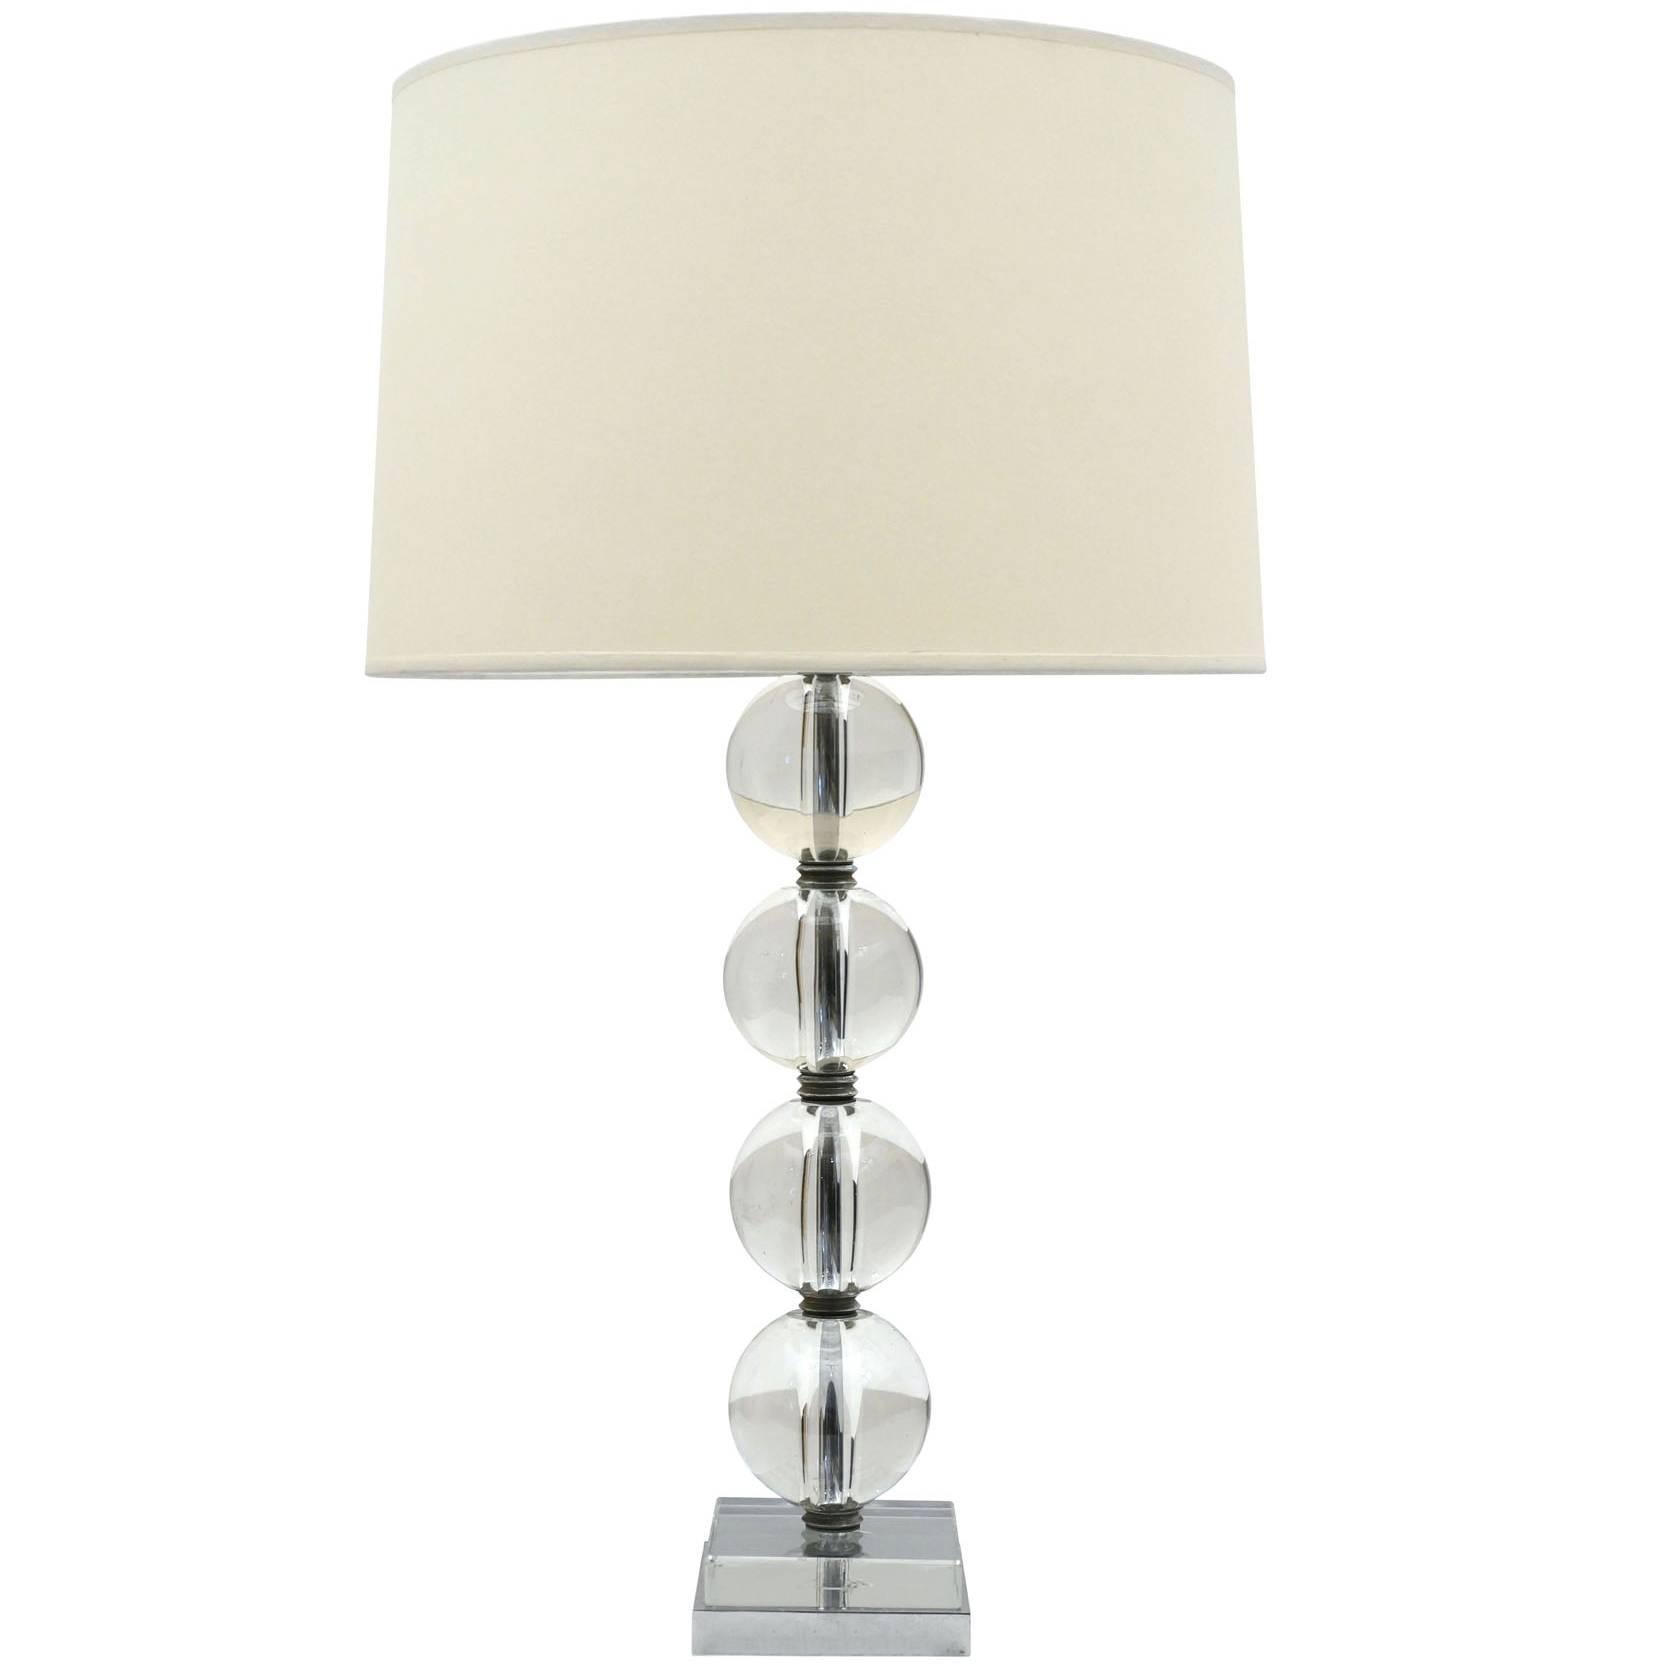 1970s Glass Ball Table Lamp on Chrome Base, France For Sale